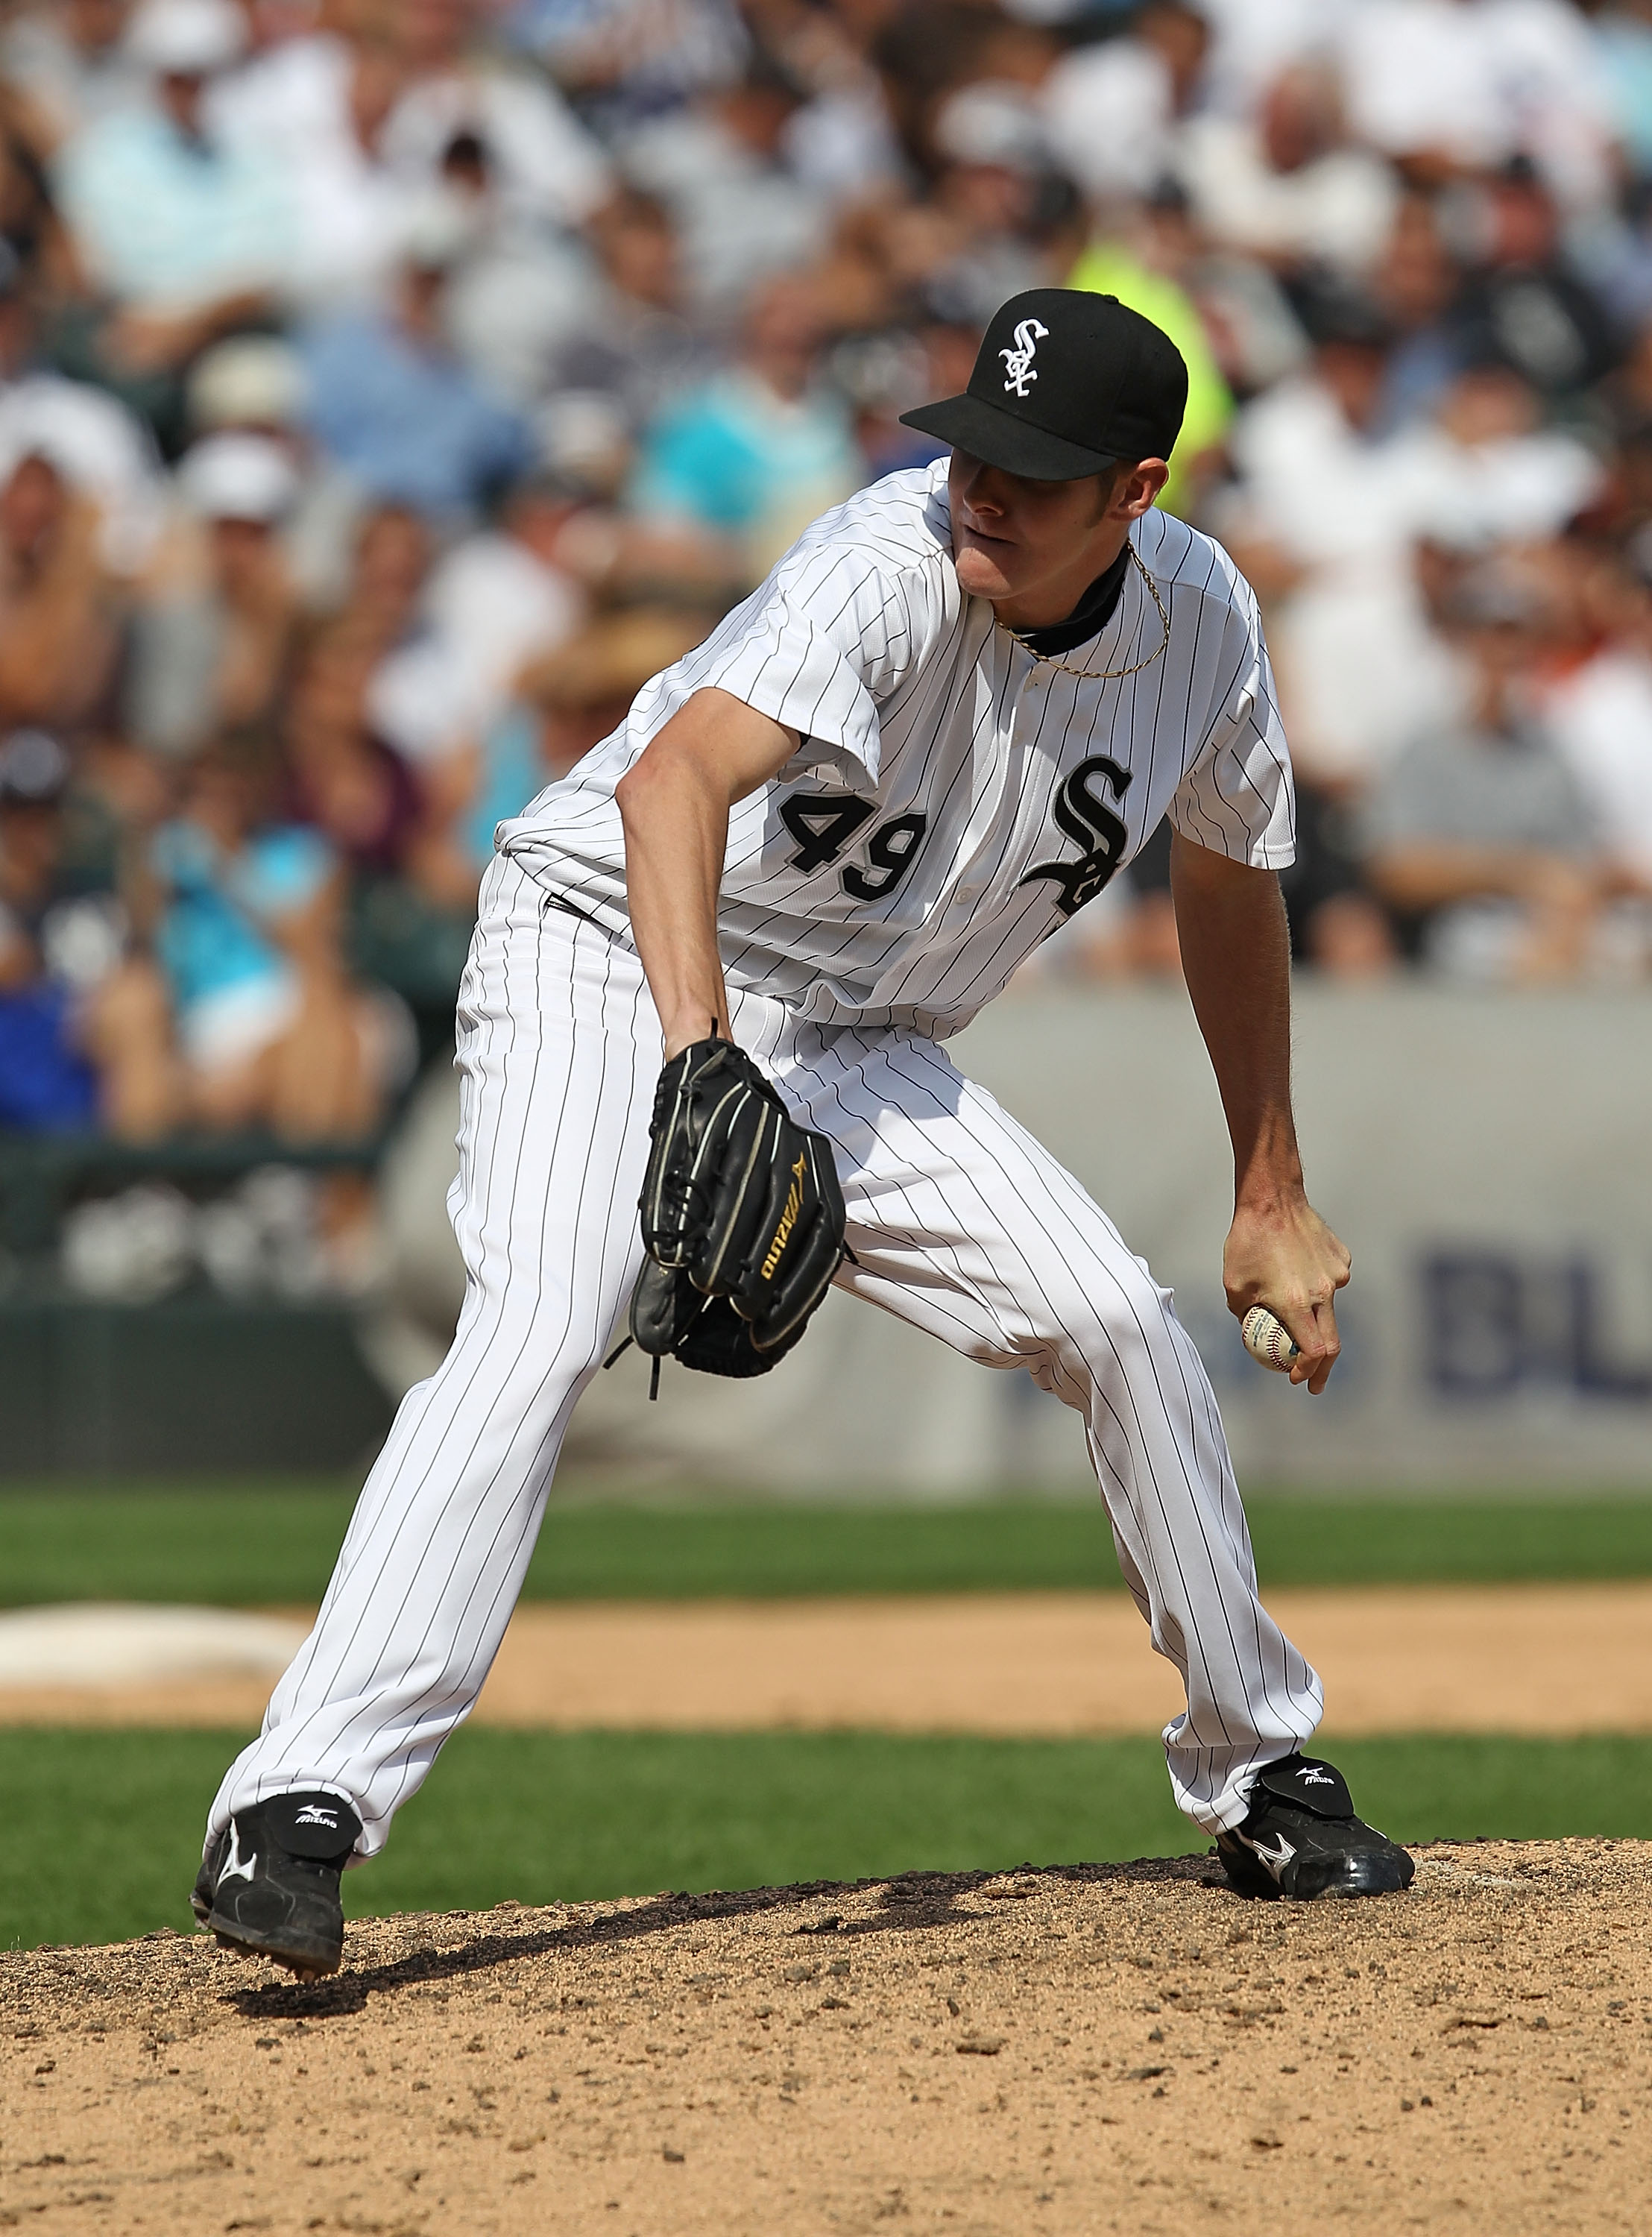 CHICAGO - AUGUST 29: Chris Sale #49 of the Chicago White Sox pitches against the New York Yankees at U.S. Cellular Field on August 29, 2010 in Chicago, Illinois. The Yankees defeated the White Sox 2-1. (Photo by Jonathan Daniel/Getty Images)